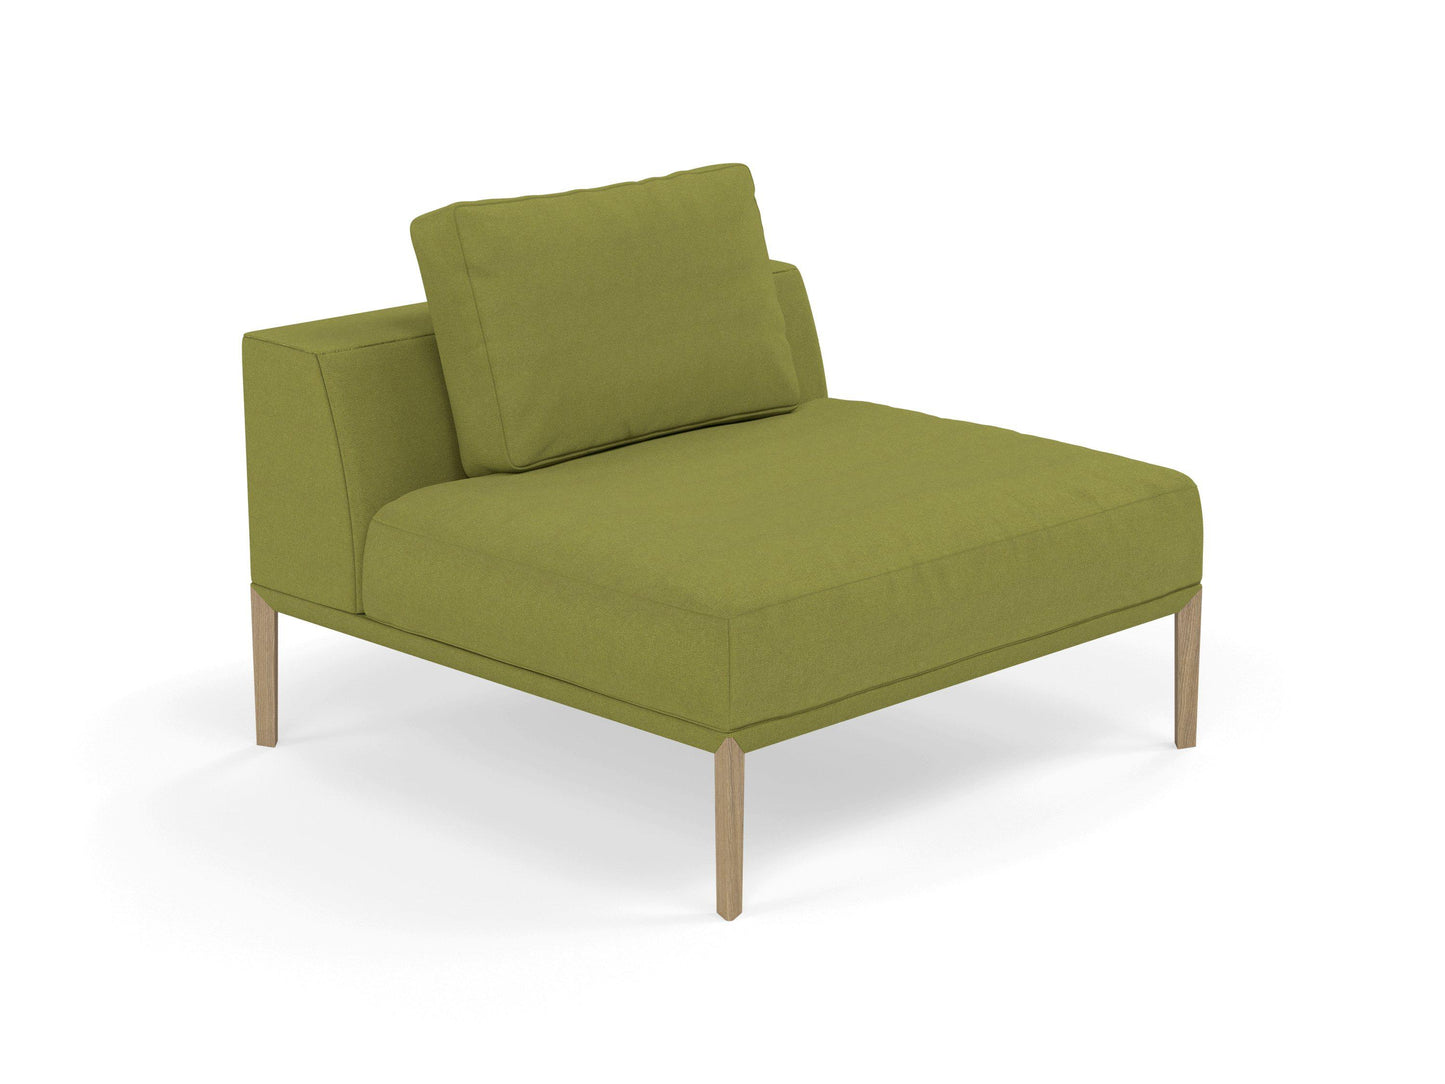 Modern Armchair 1 Seater Sofa without armrests in Lime Green Fabric-Distinct Designs (London) Ltd